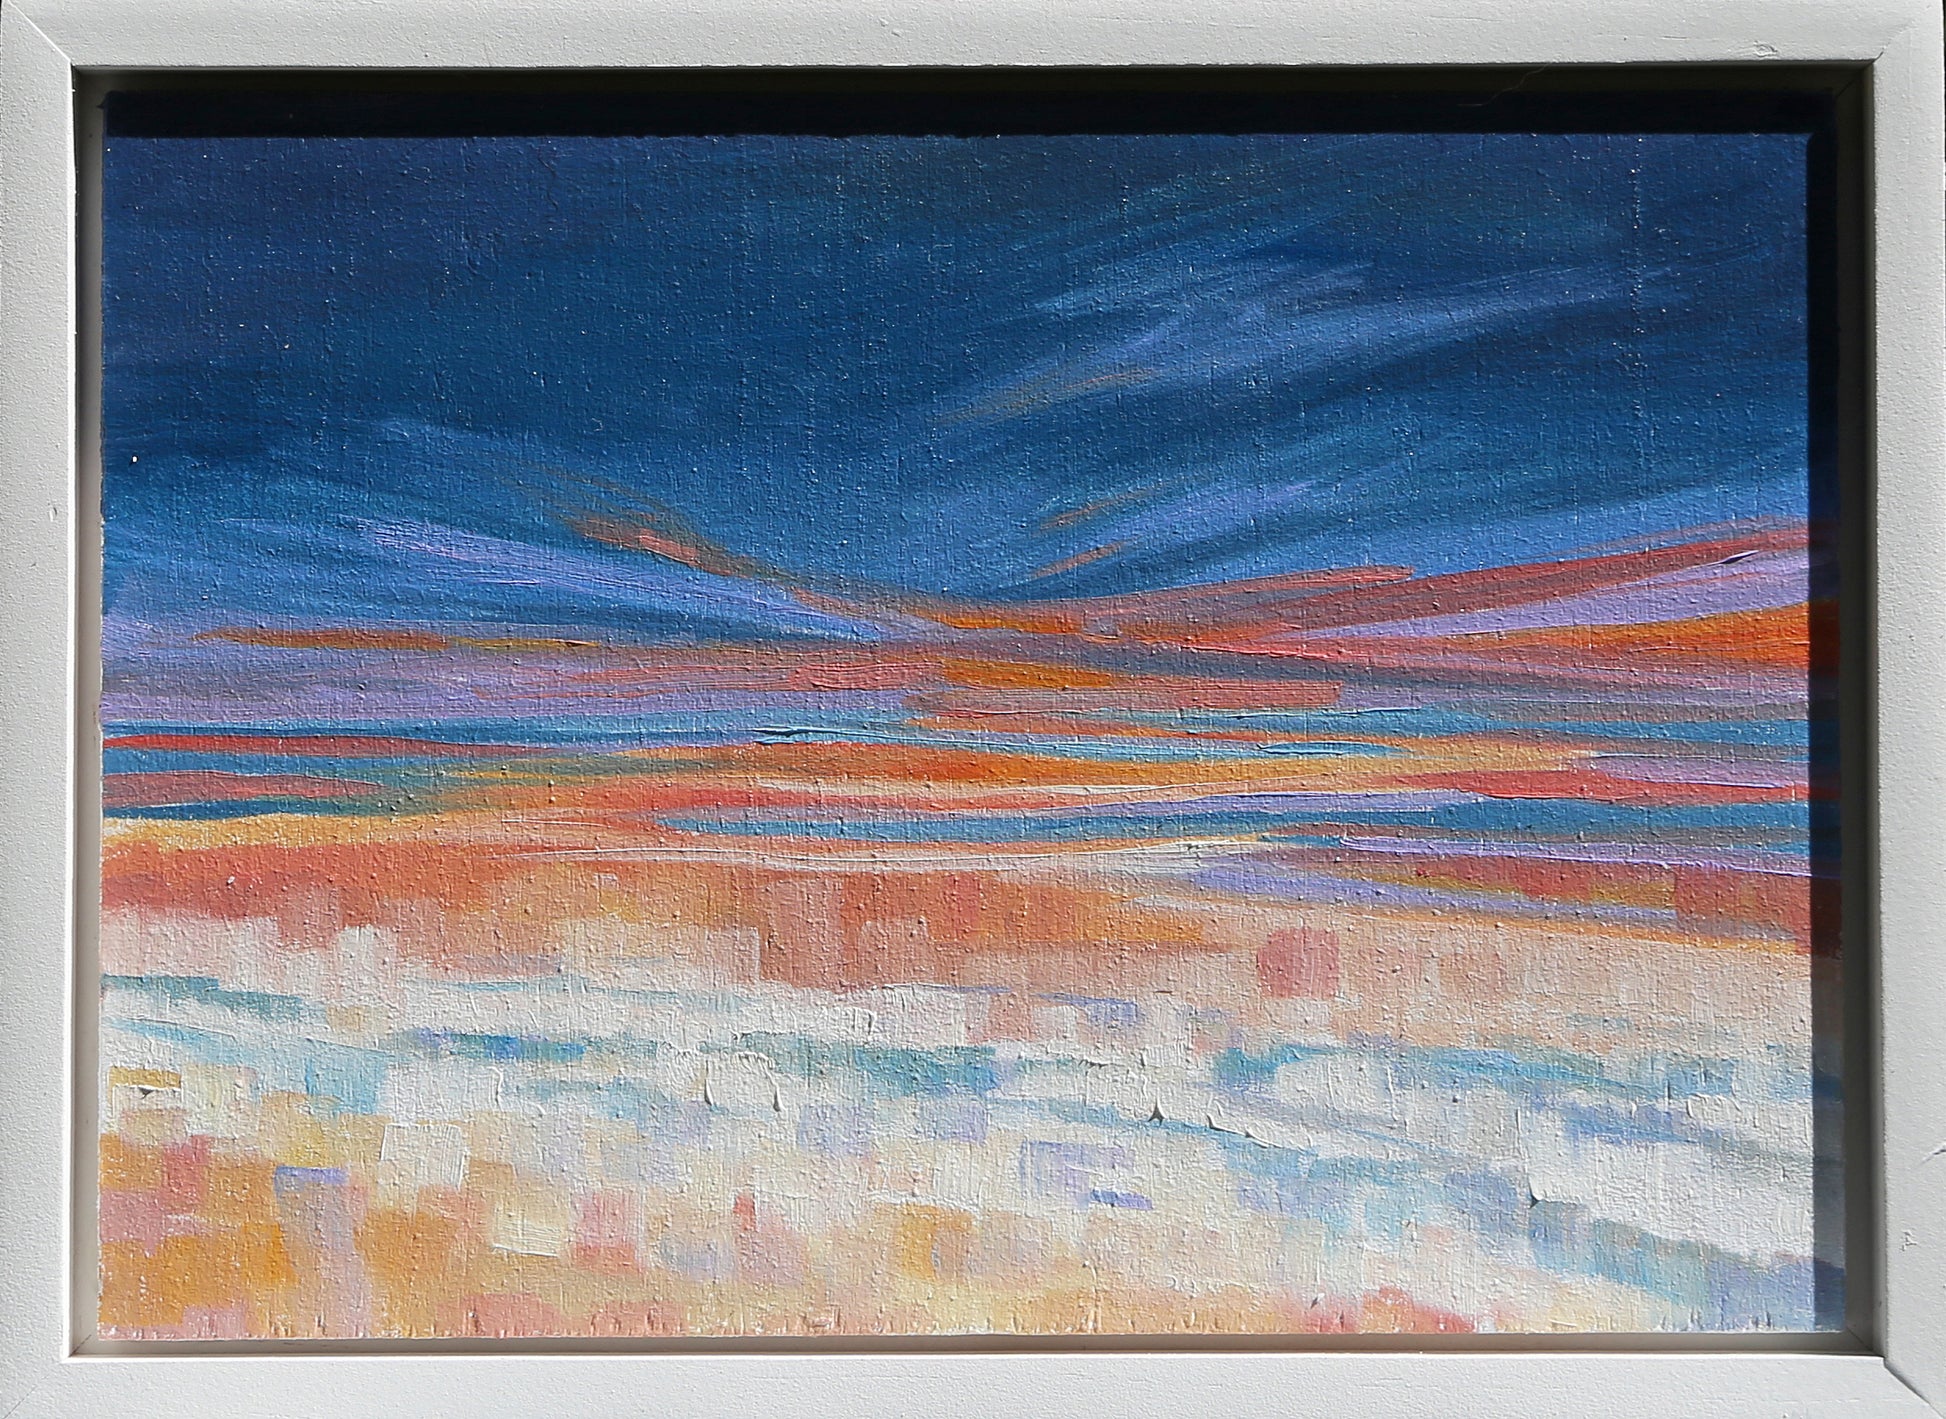 As Far offers a stunning addition to any home decor with its abstract original oil painting in bright sunset colors. Ready to hang in a white frame, this small yet impactful piece adds a touch of fine art to your space.